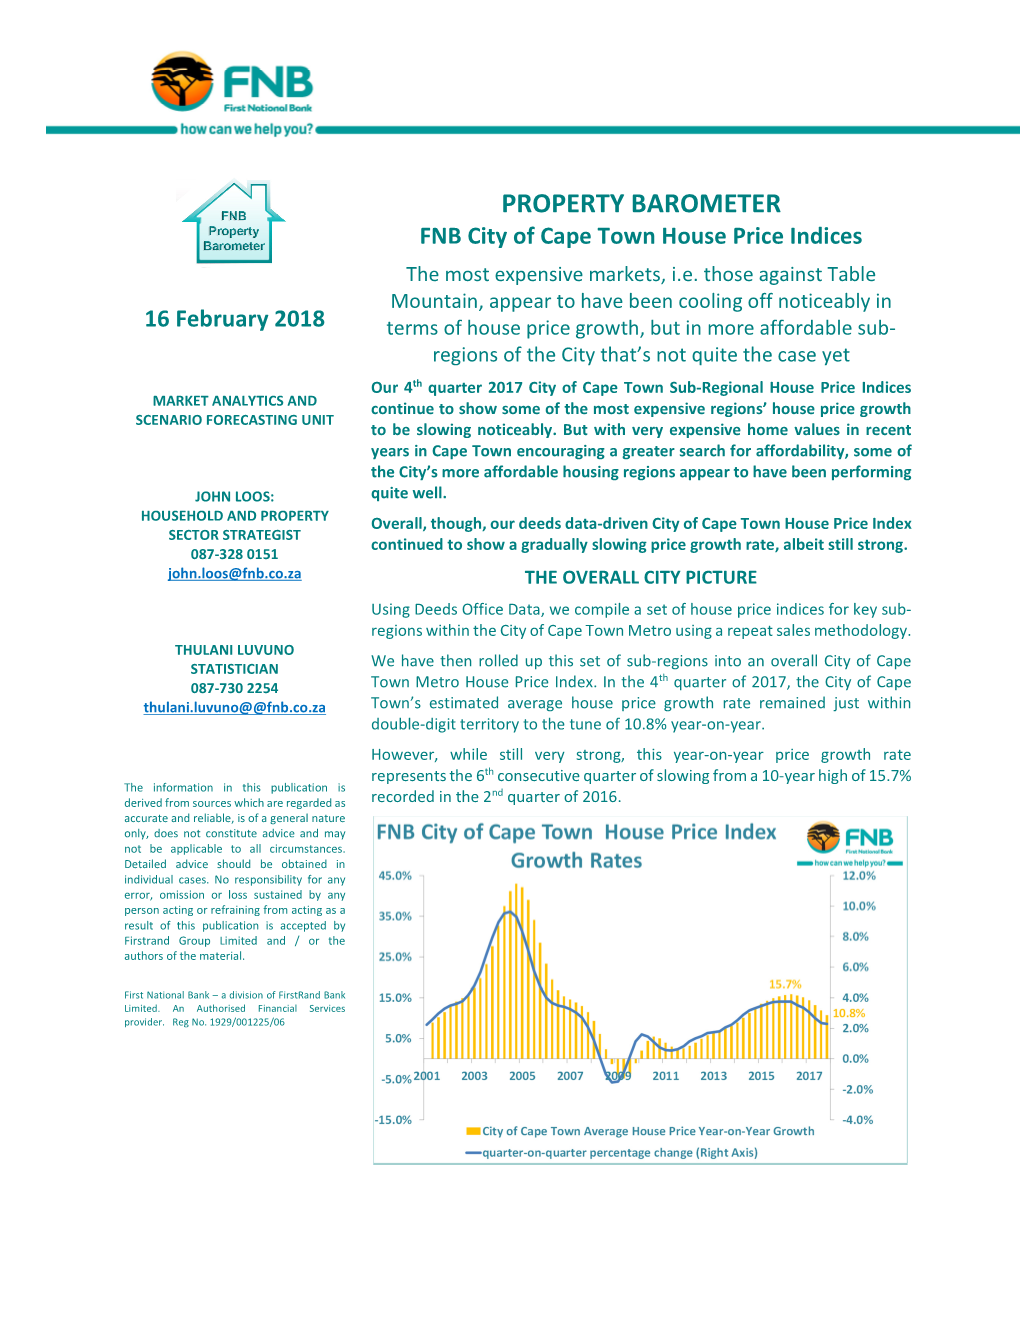 PROPERTY BAROMETER FNB City of Cape Town House Price Indices the Most Expensive Markets, I.E